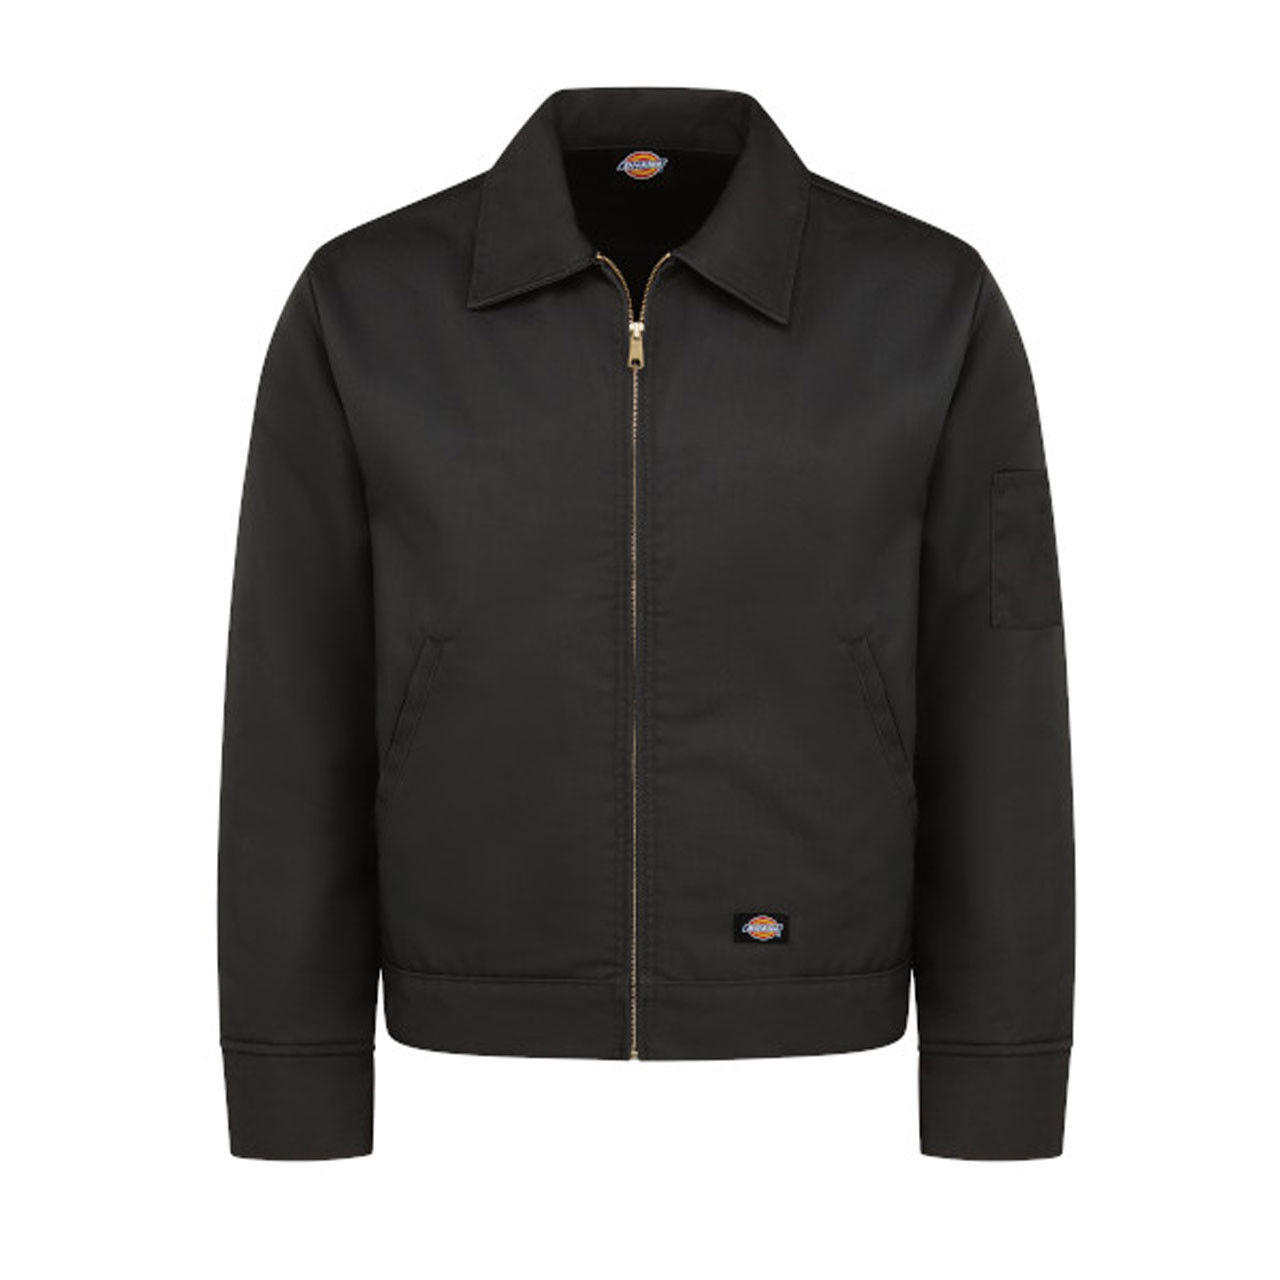 What is the shell composition of this black Dickies jacket?